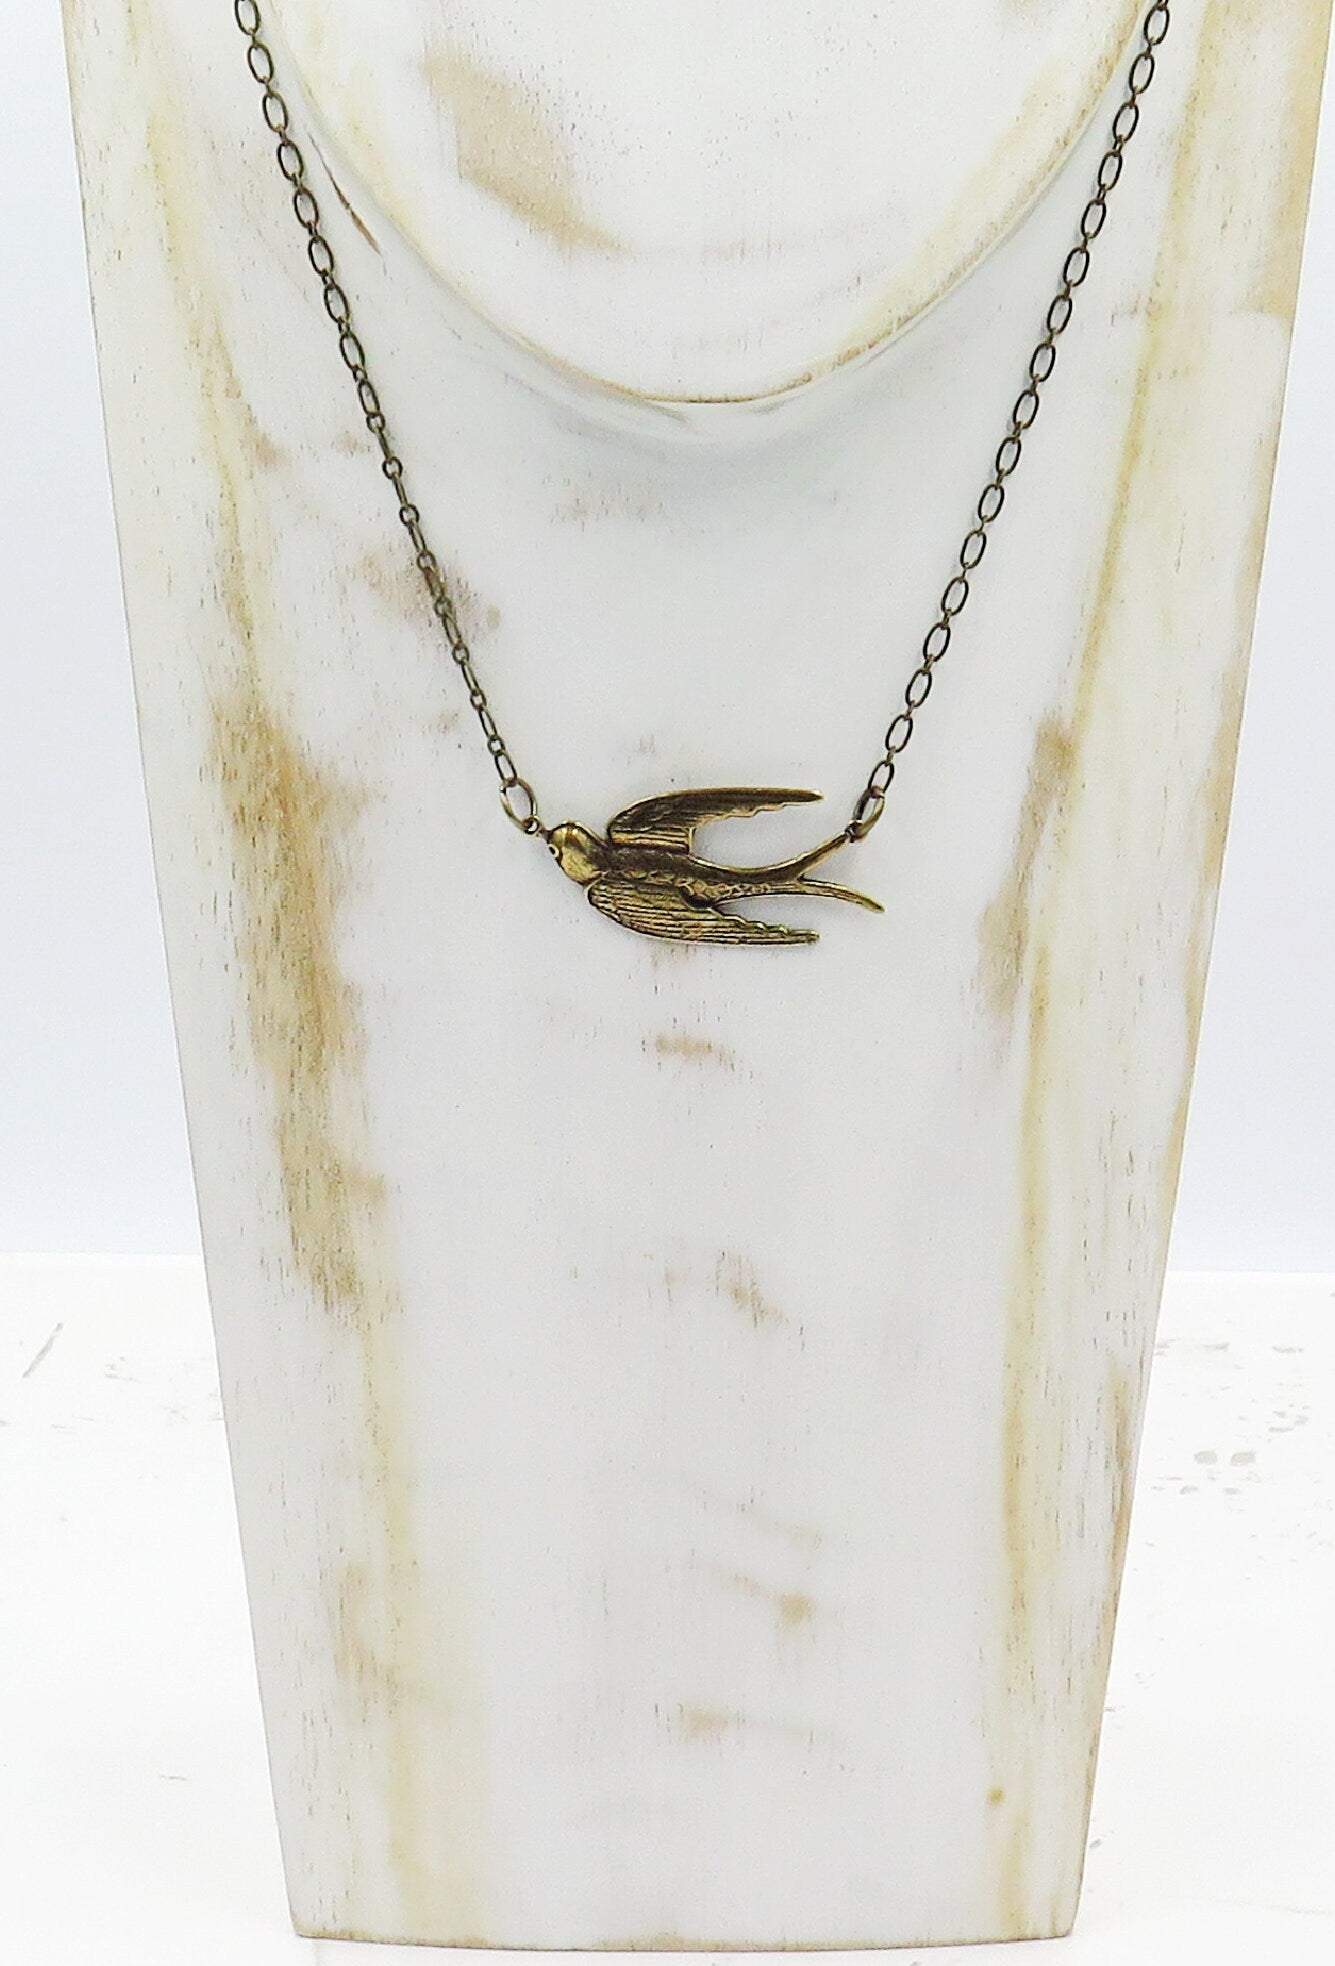 The Swallow Bird Necklace